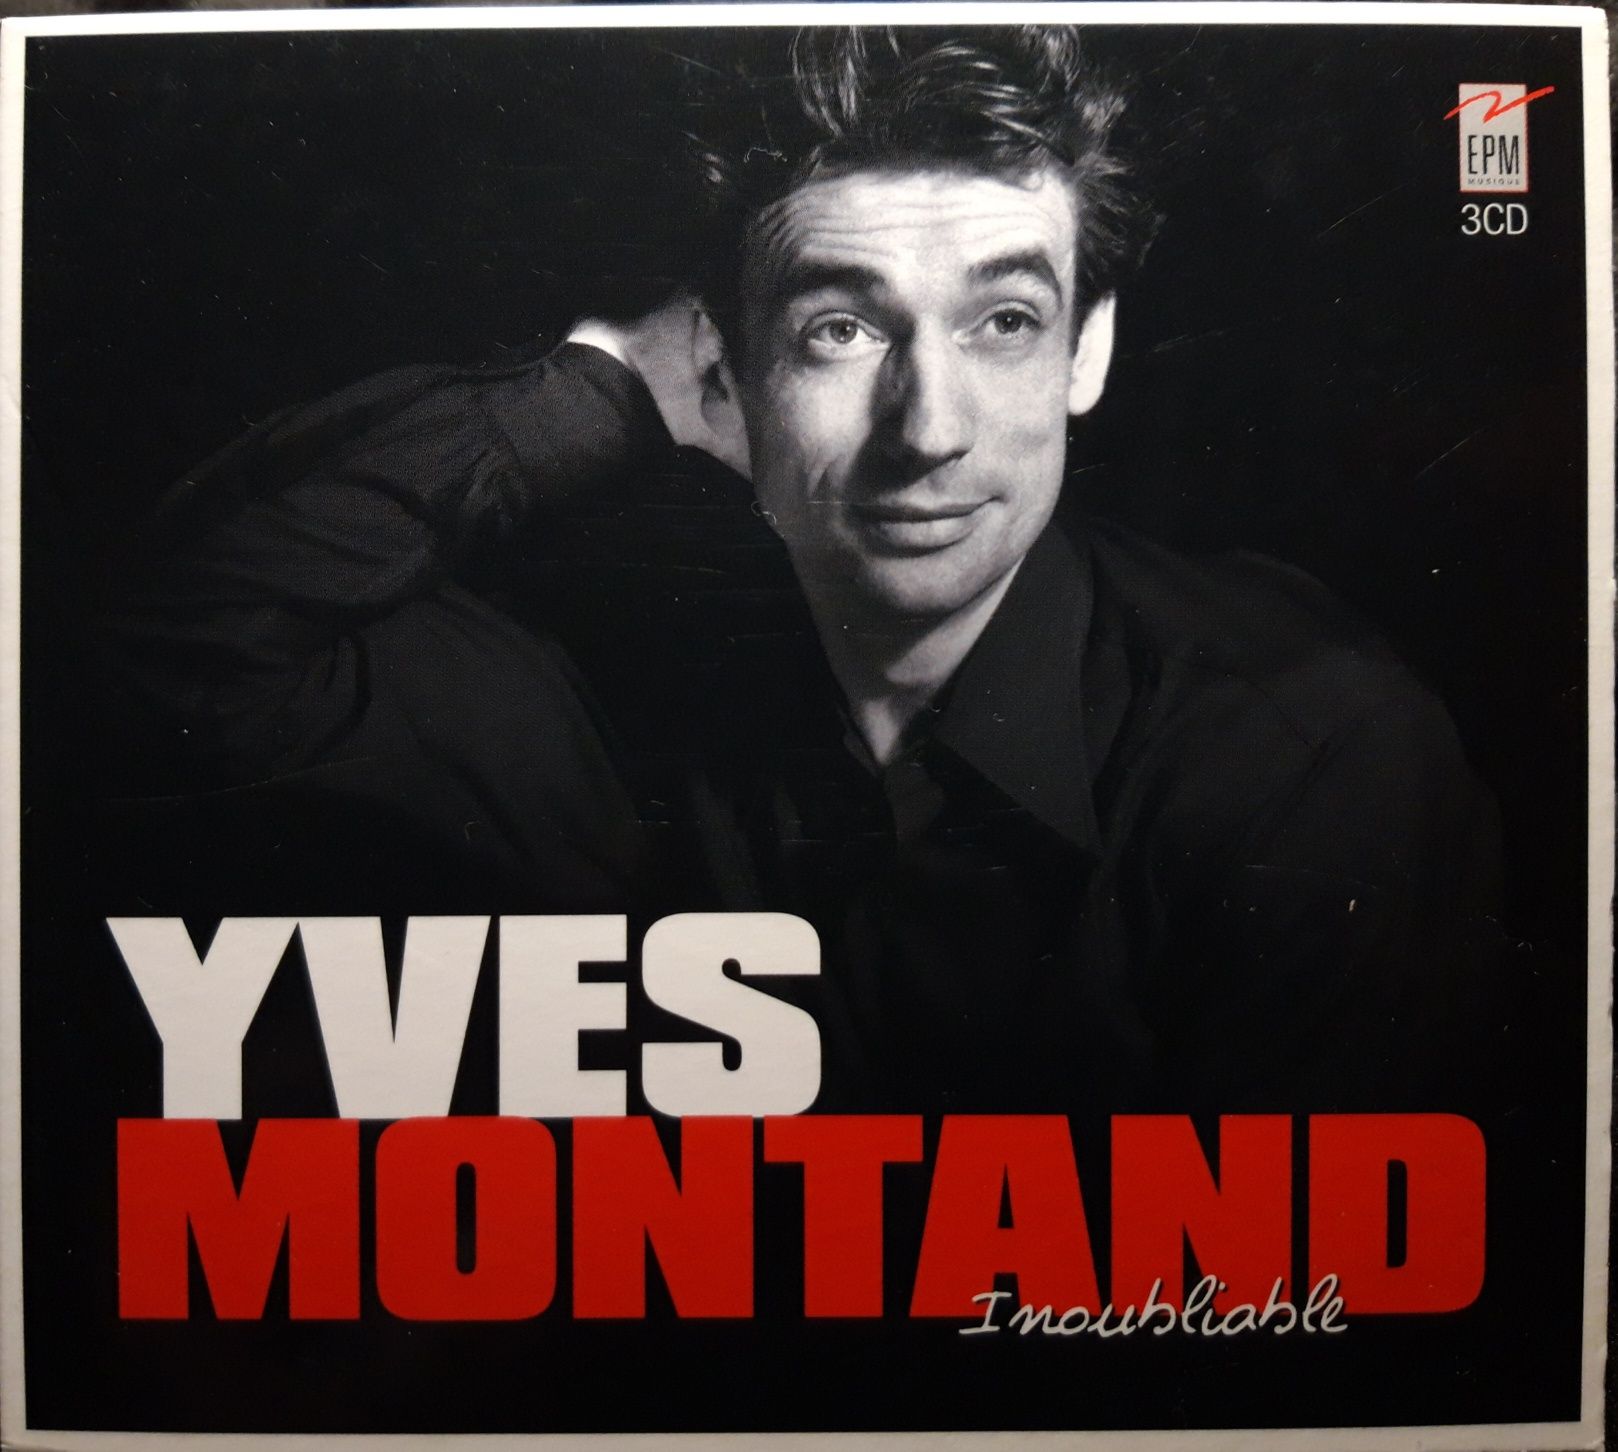 Yves Montand - Inoubliable (3xCD, 2016)